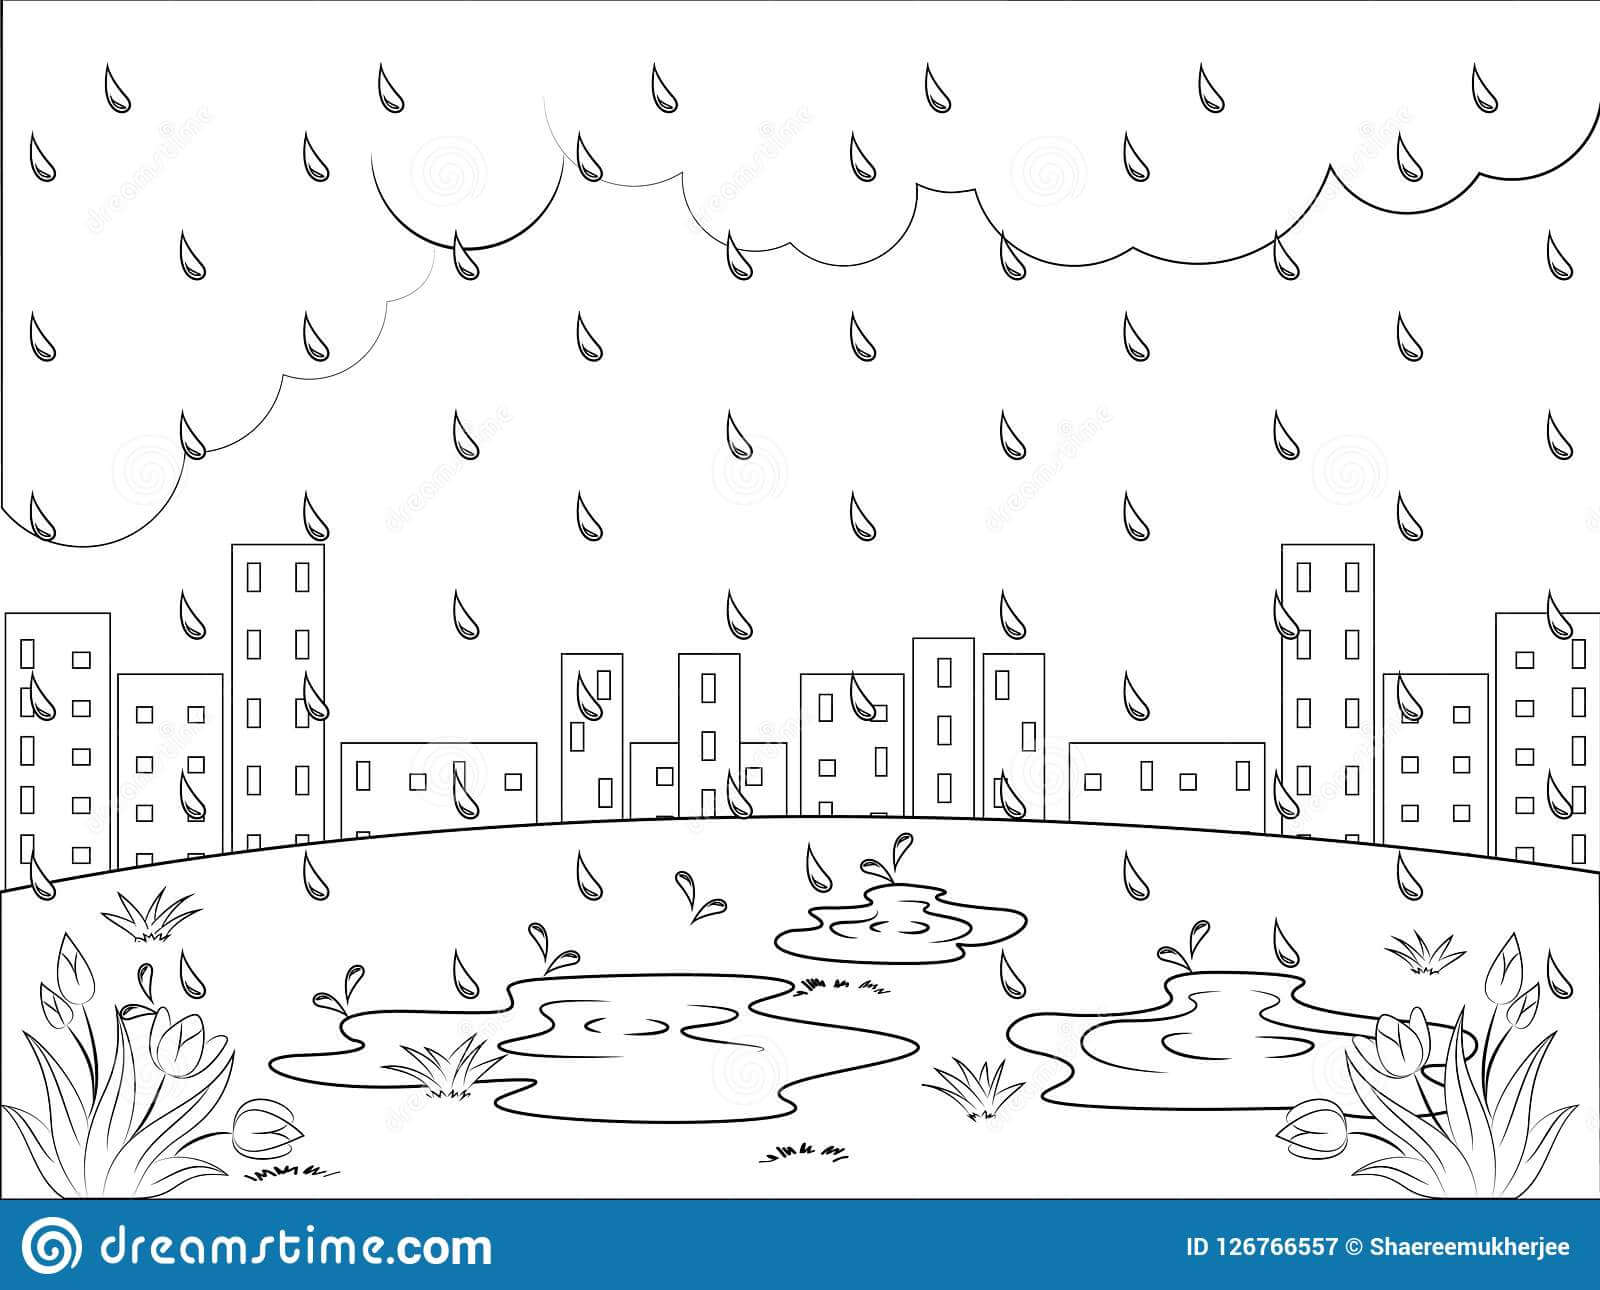 free printable rainy day coloring pages | app to make coloring pages | benefits of coloring pages